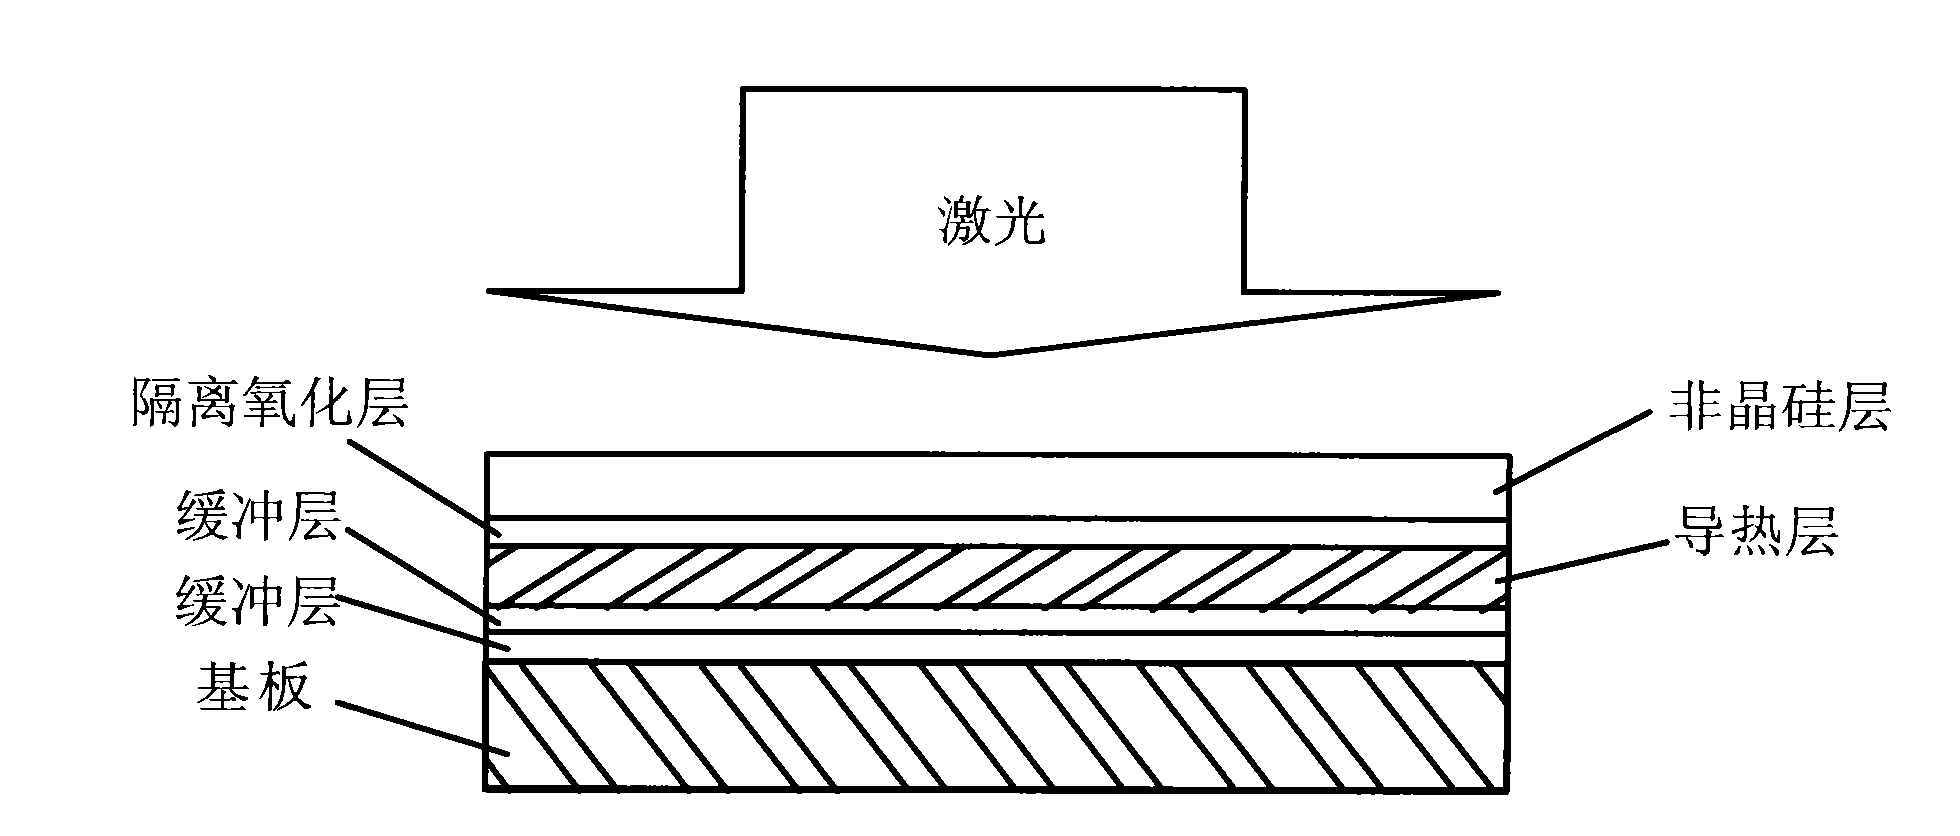 Image display system and manufacture method thereof